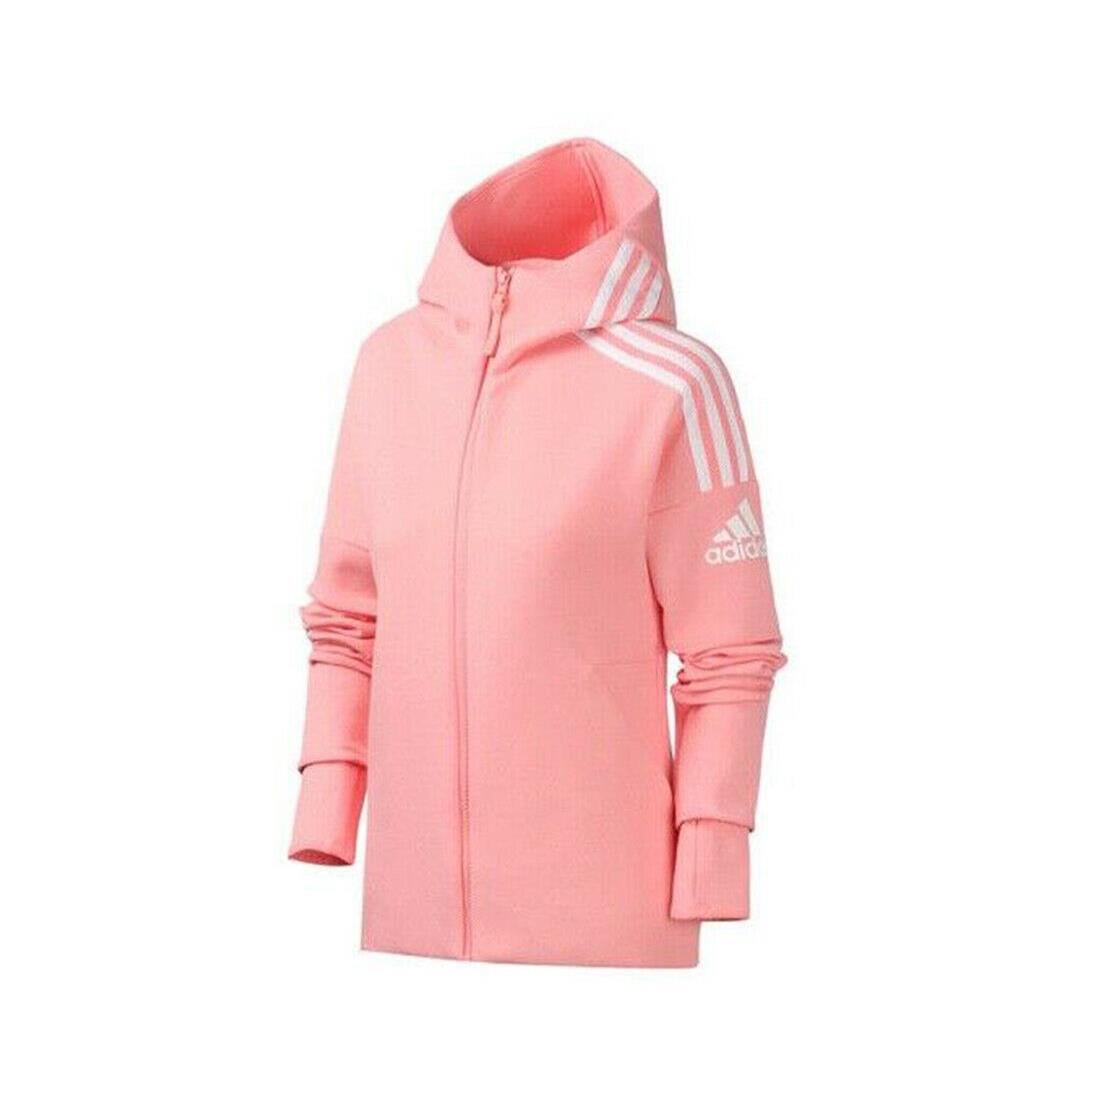 Adidas Z.n.e Womens Active Hoodies Size S Color: Pink/white